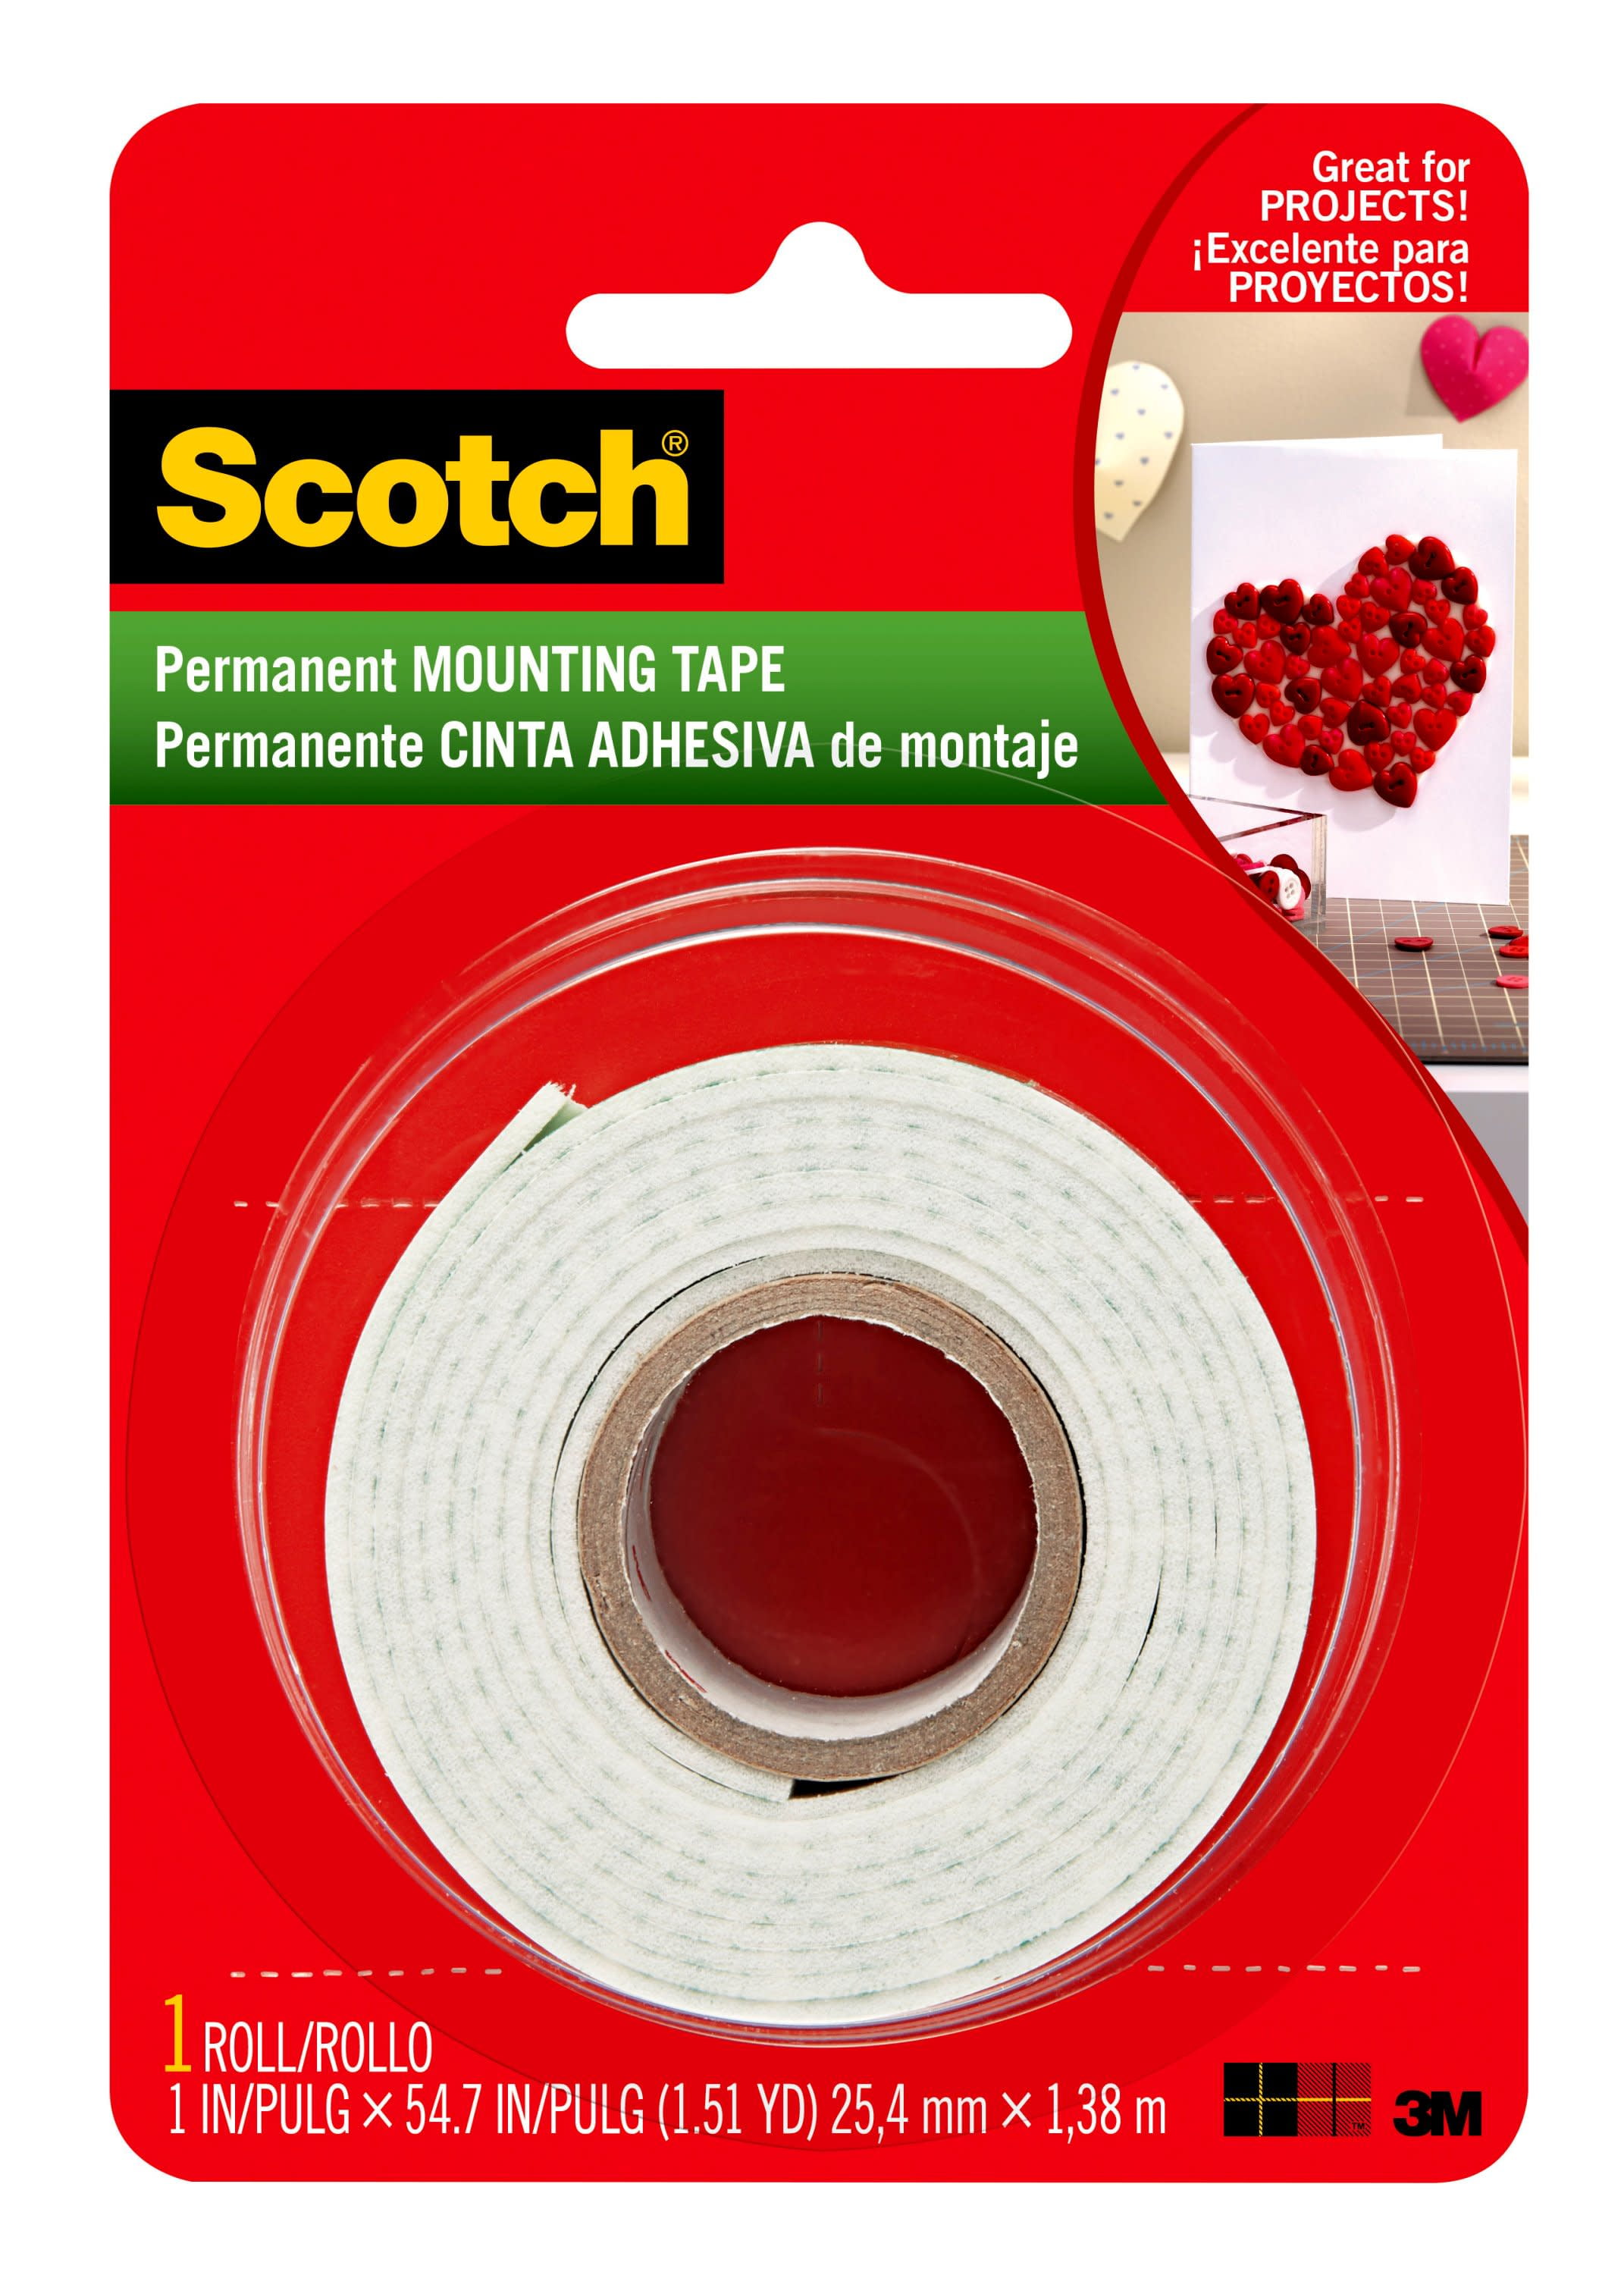 Scotch® Indoor Mounting Tape, 0.5 in. x 75 in., 1 Roll/Pack